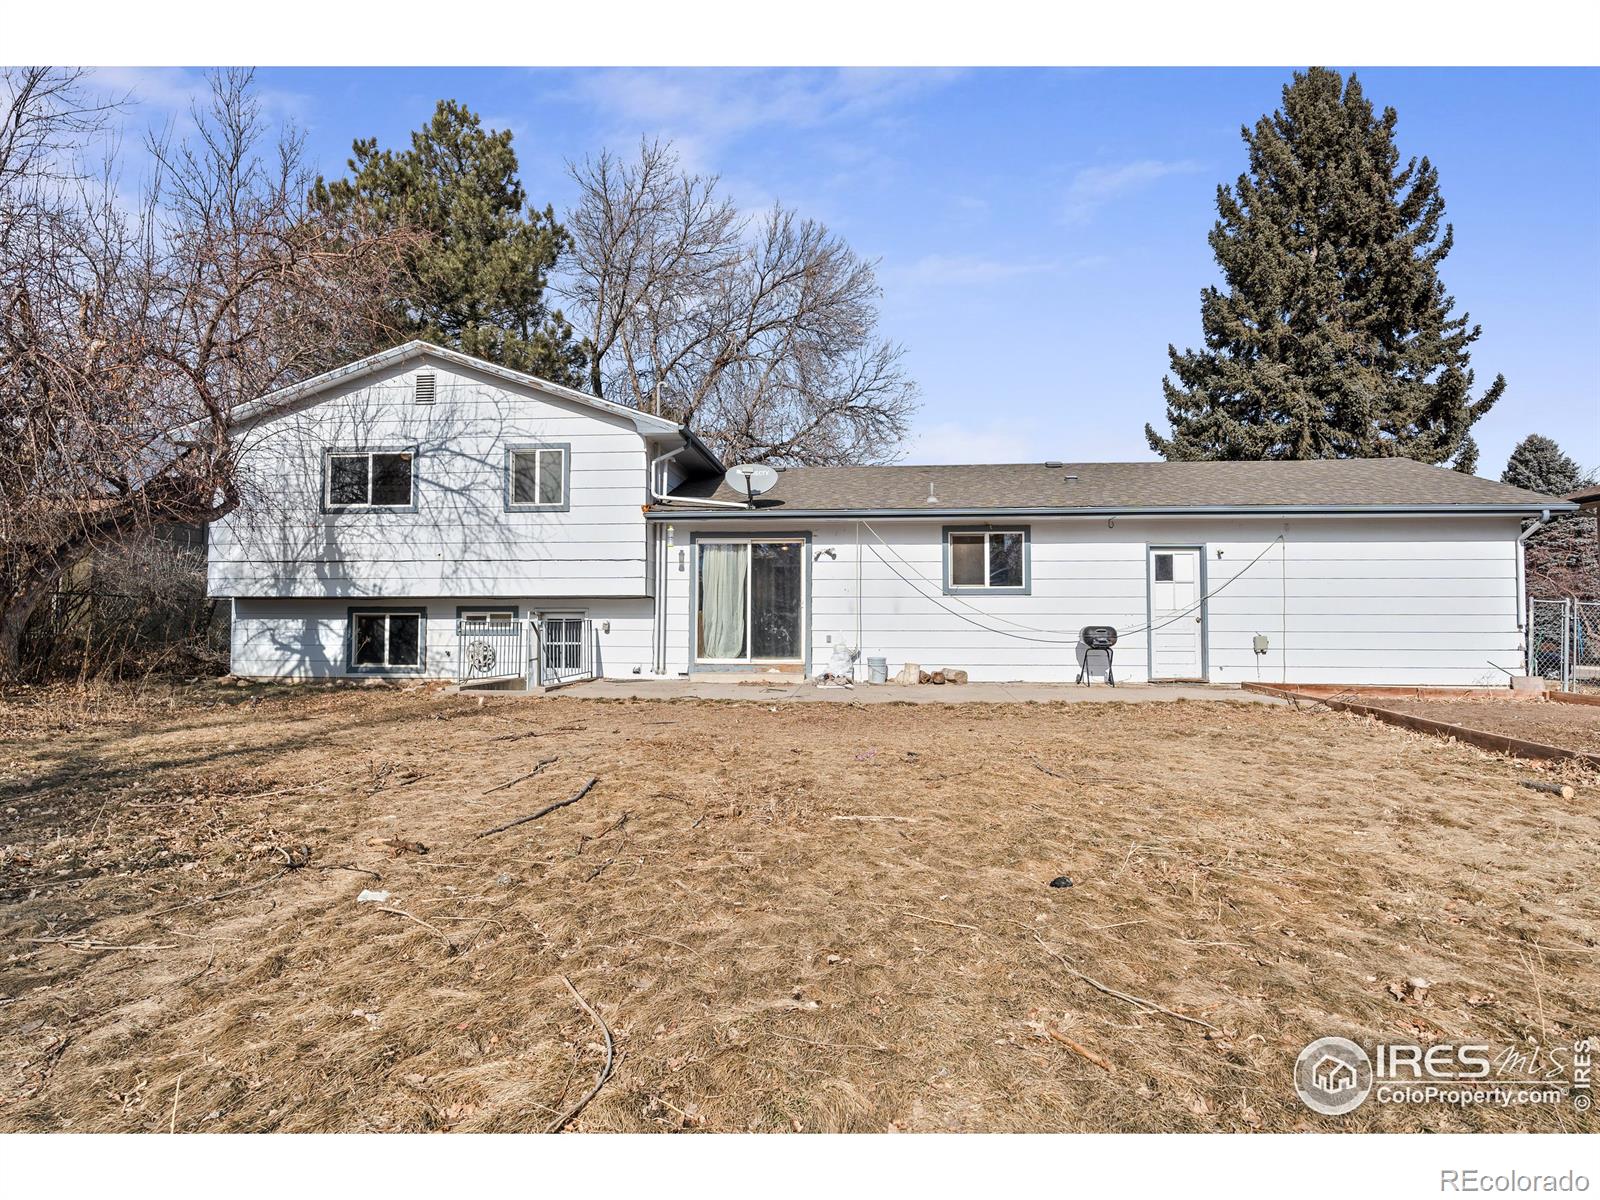 1825 Scarborough, Fort Collins, CO